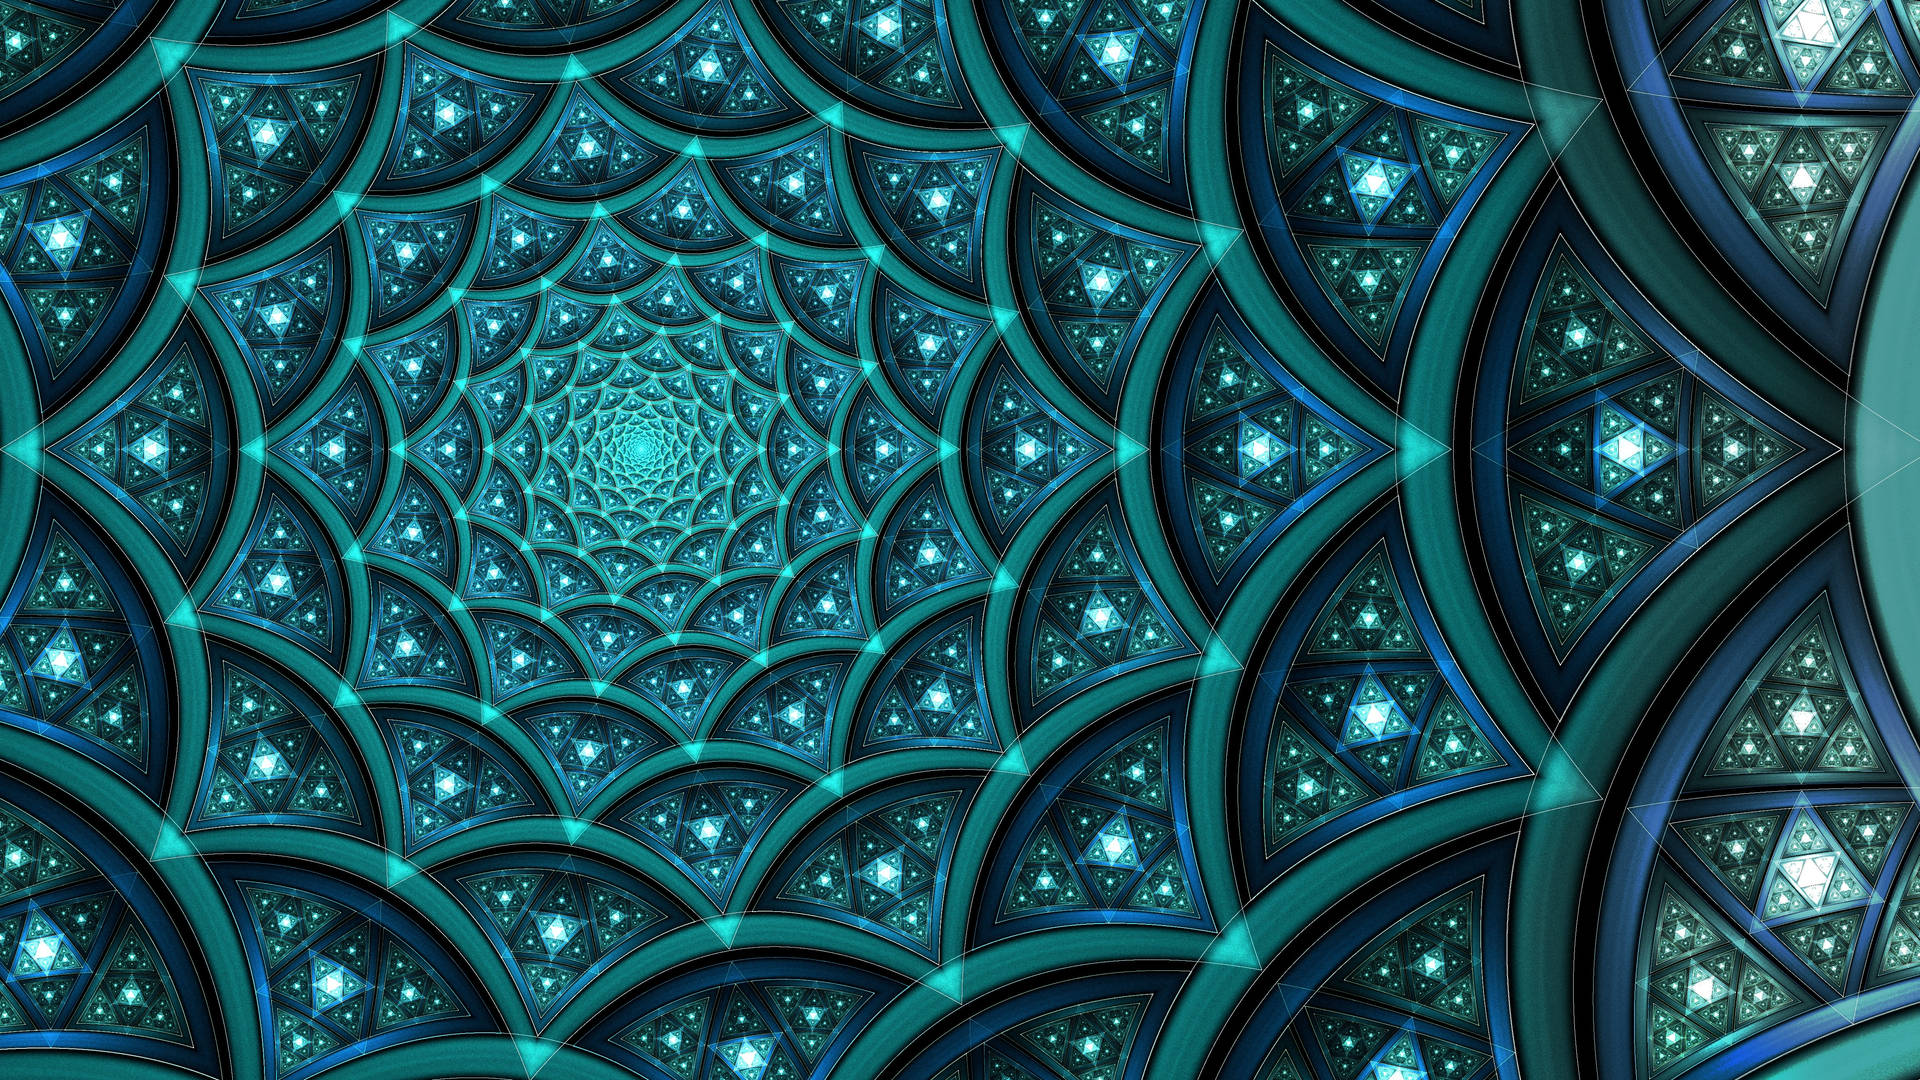 Green background with half circles in spiral effect.